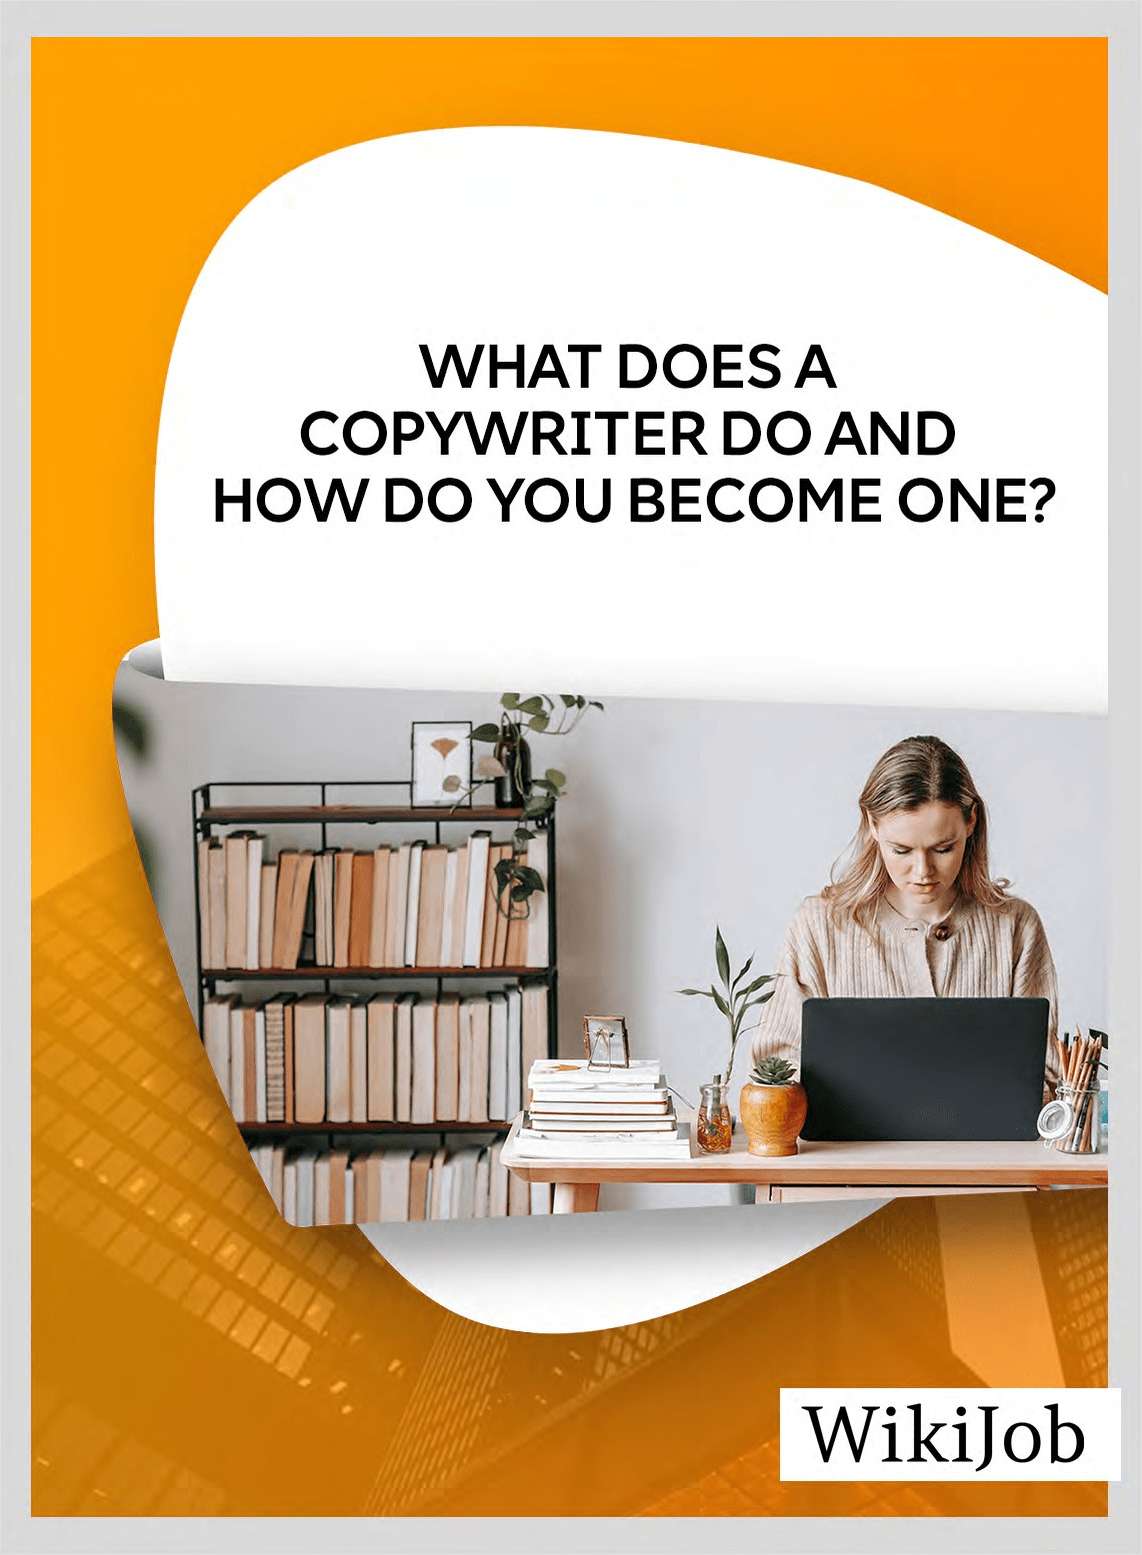 What Does a Copywriter Do and How Do You Become One?